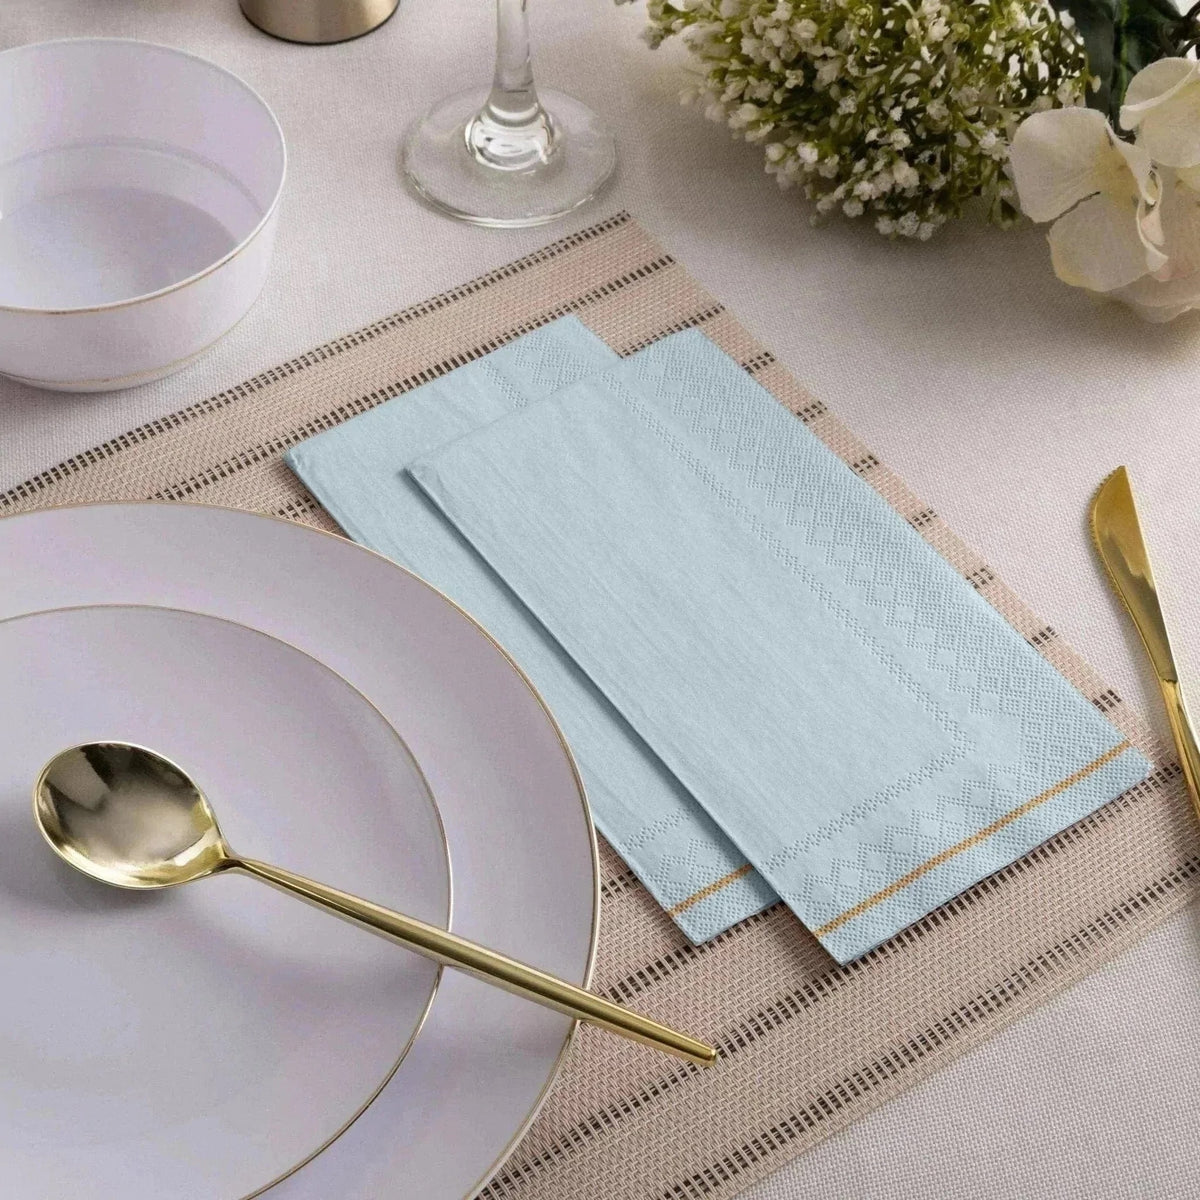 Light Blue & Gold Scallop Dessert Plates 6ct | The Party Darling